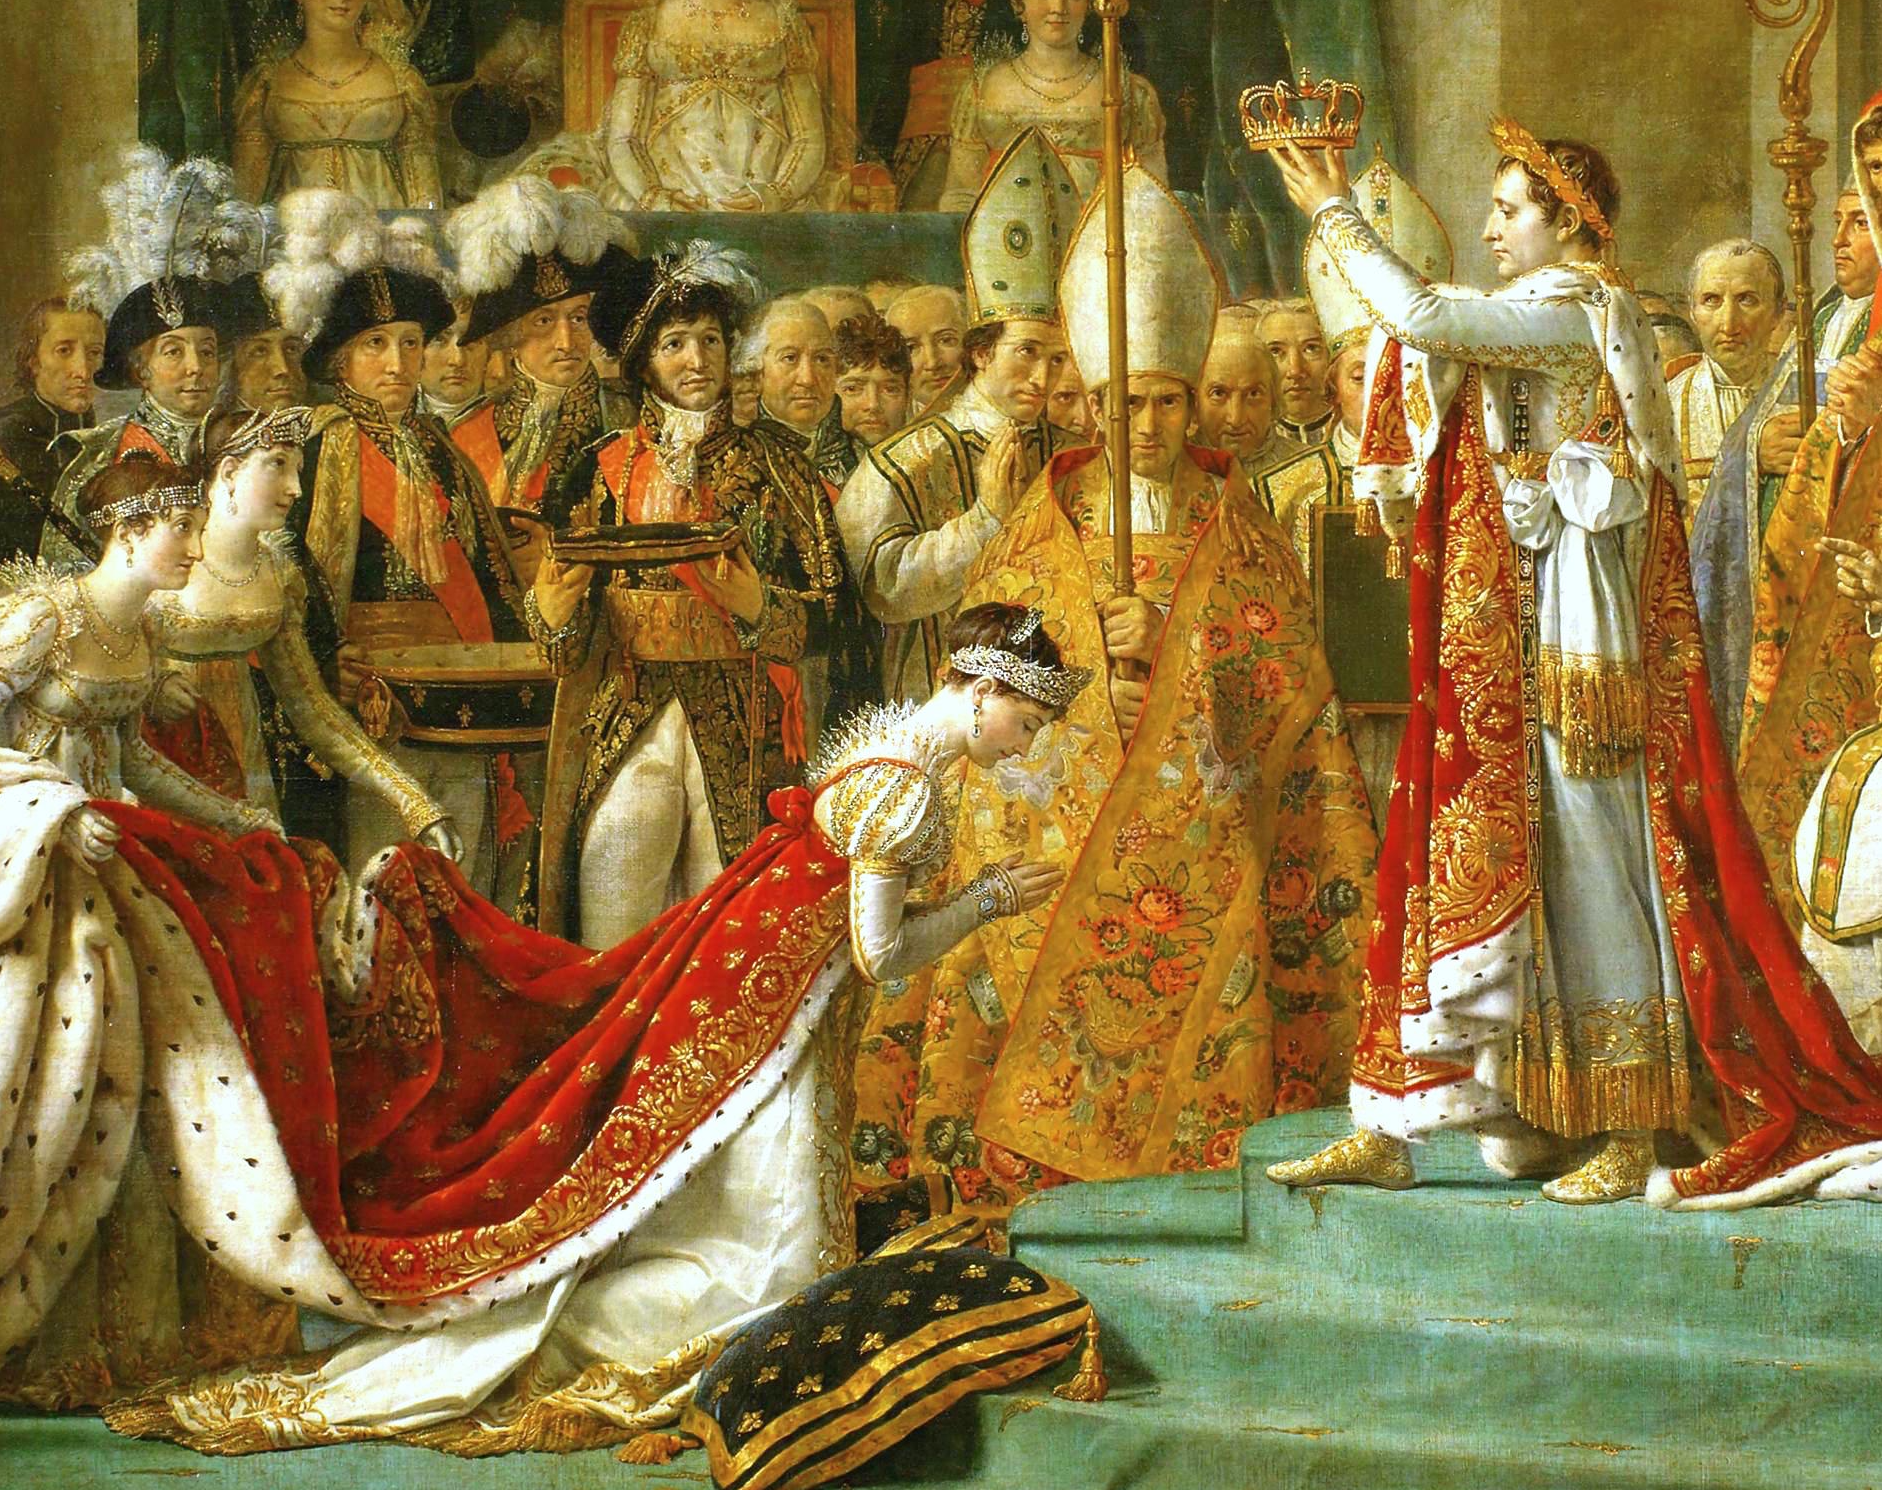 This massive 20 foot tall painting was part of the Napoleon propaganda machine. Coronation of Emperor Napoleon I and Coronation of the Empress Josephine in Notre-Dame de Paris, December 2, 1804 by Jacques-Louis David, 1805-1807. The Louvre.